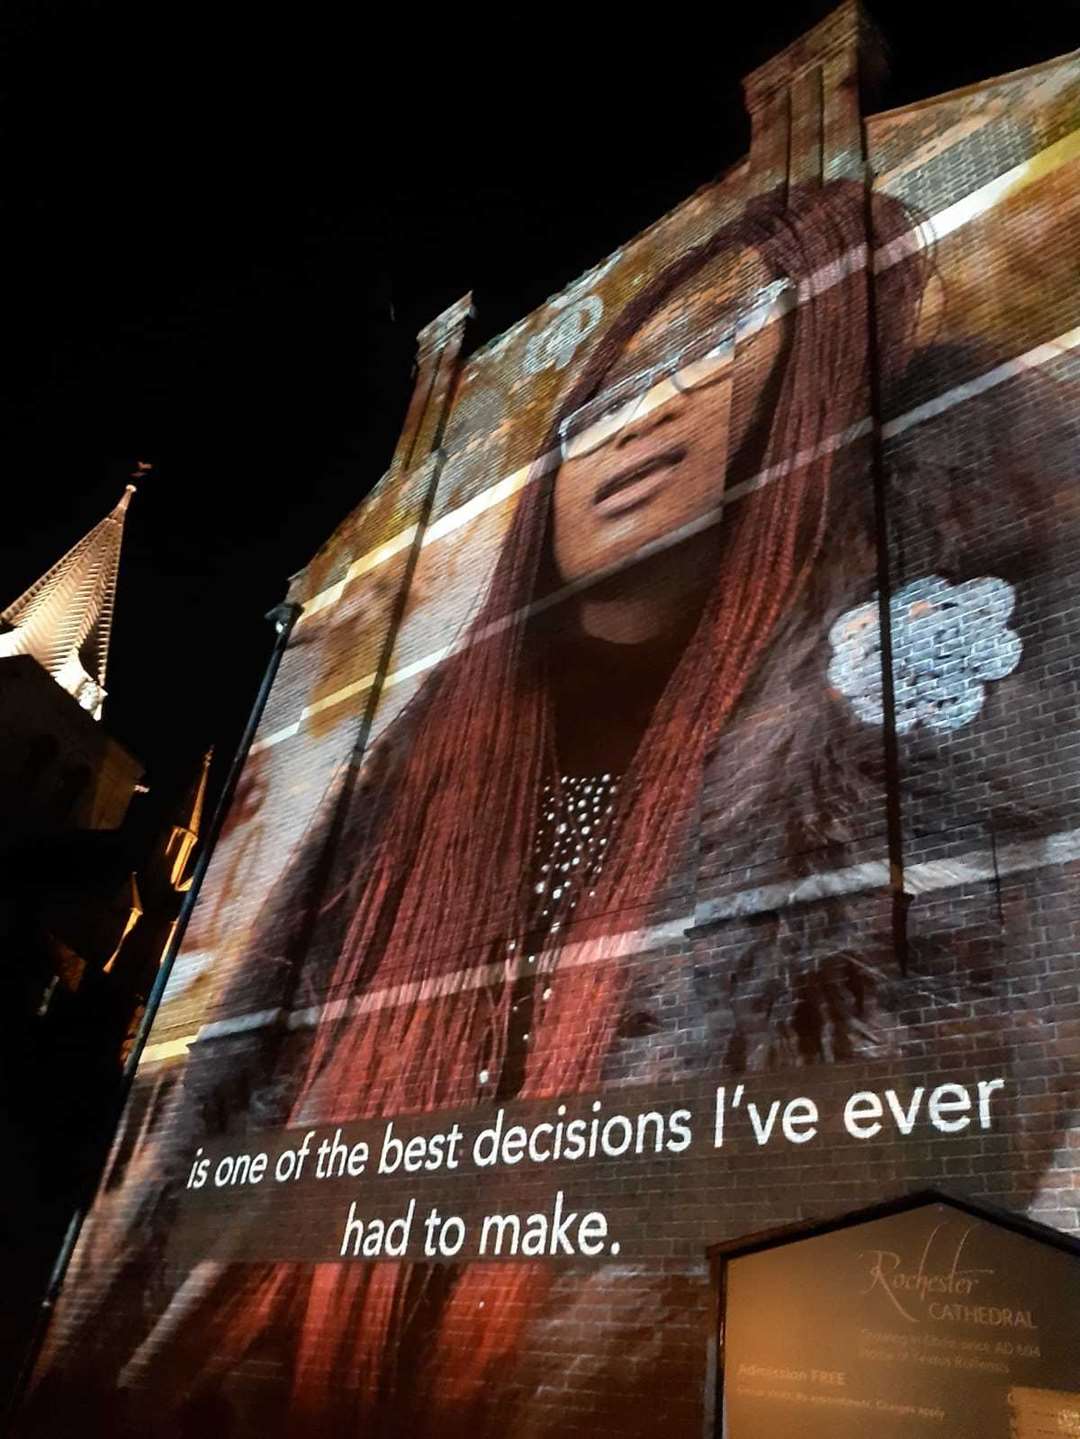 Productions were projected onto Rochester Cathedral